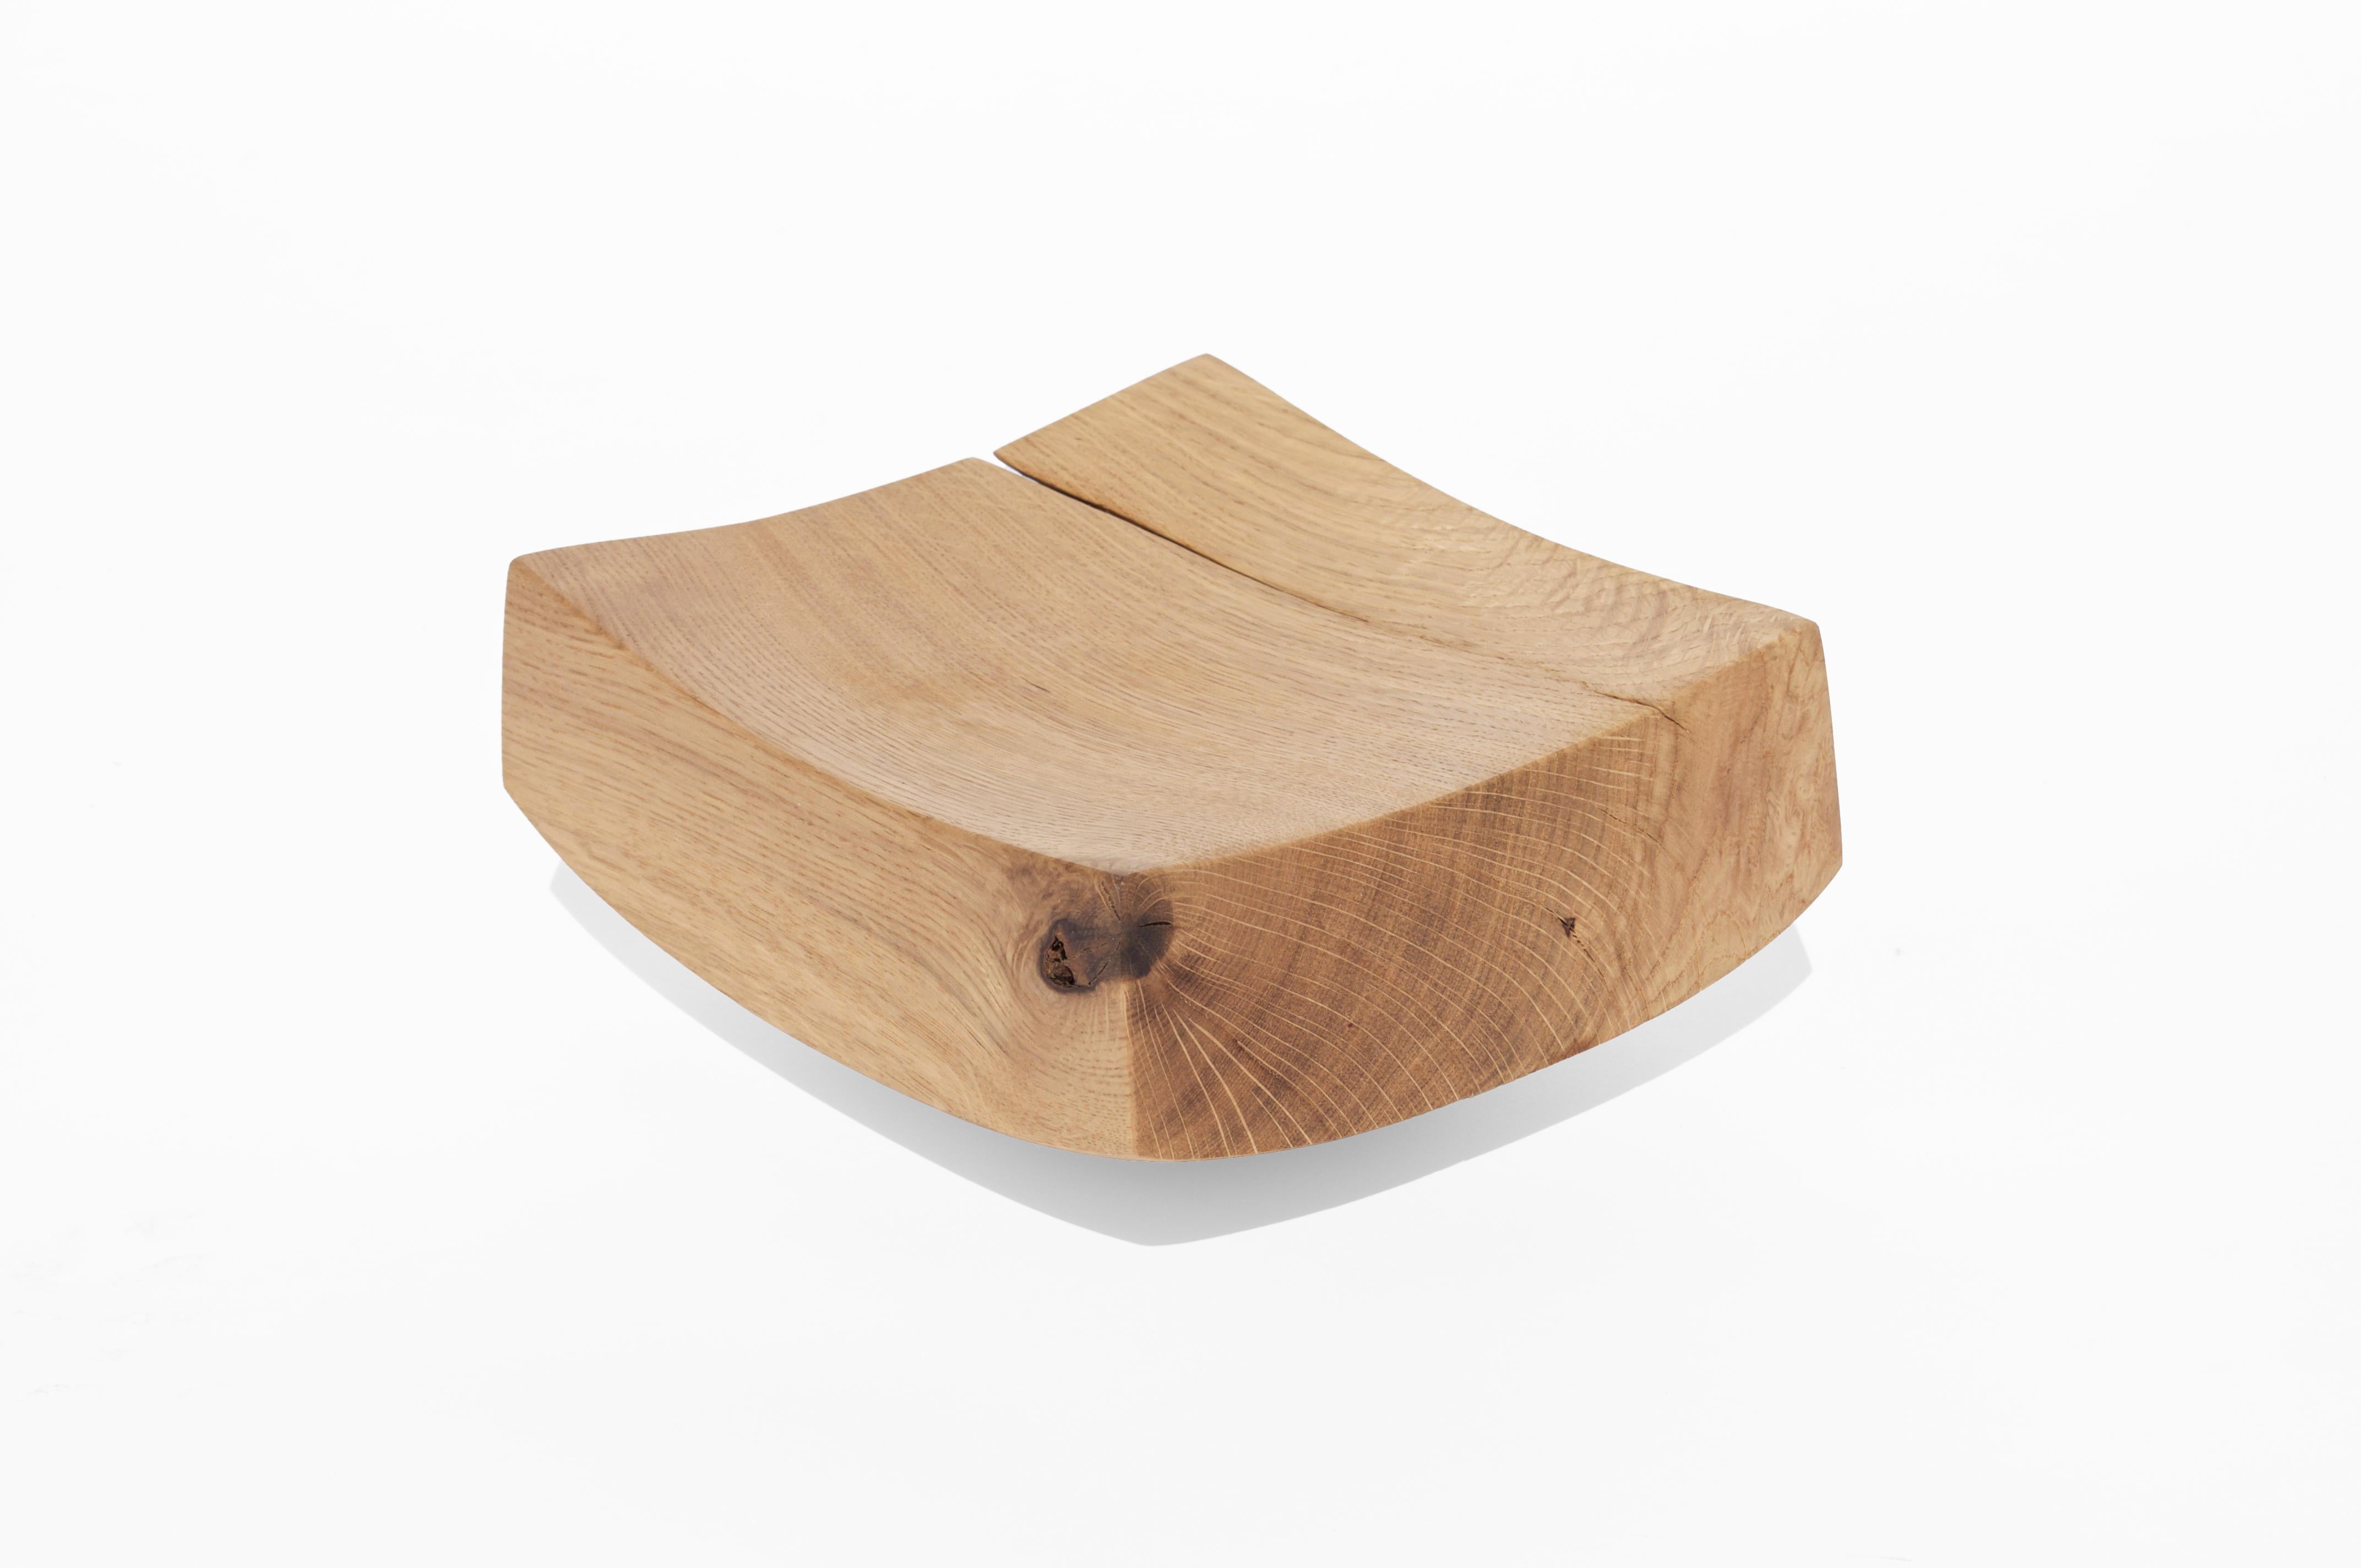 vessel 1467 by Jörg Pietschmann
Dimensions: D 17 x W 20.5 x H 11 cm 
Materials: Oak.
Finish: Polished oil finish.


In Pietschmann’s sculptures, trees that for centuries were part of a landscape and founded in primordial forces tell stories